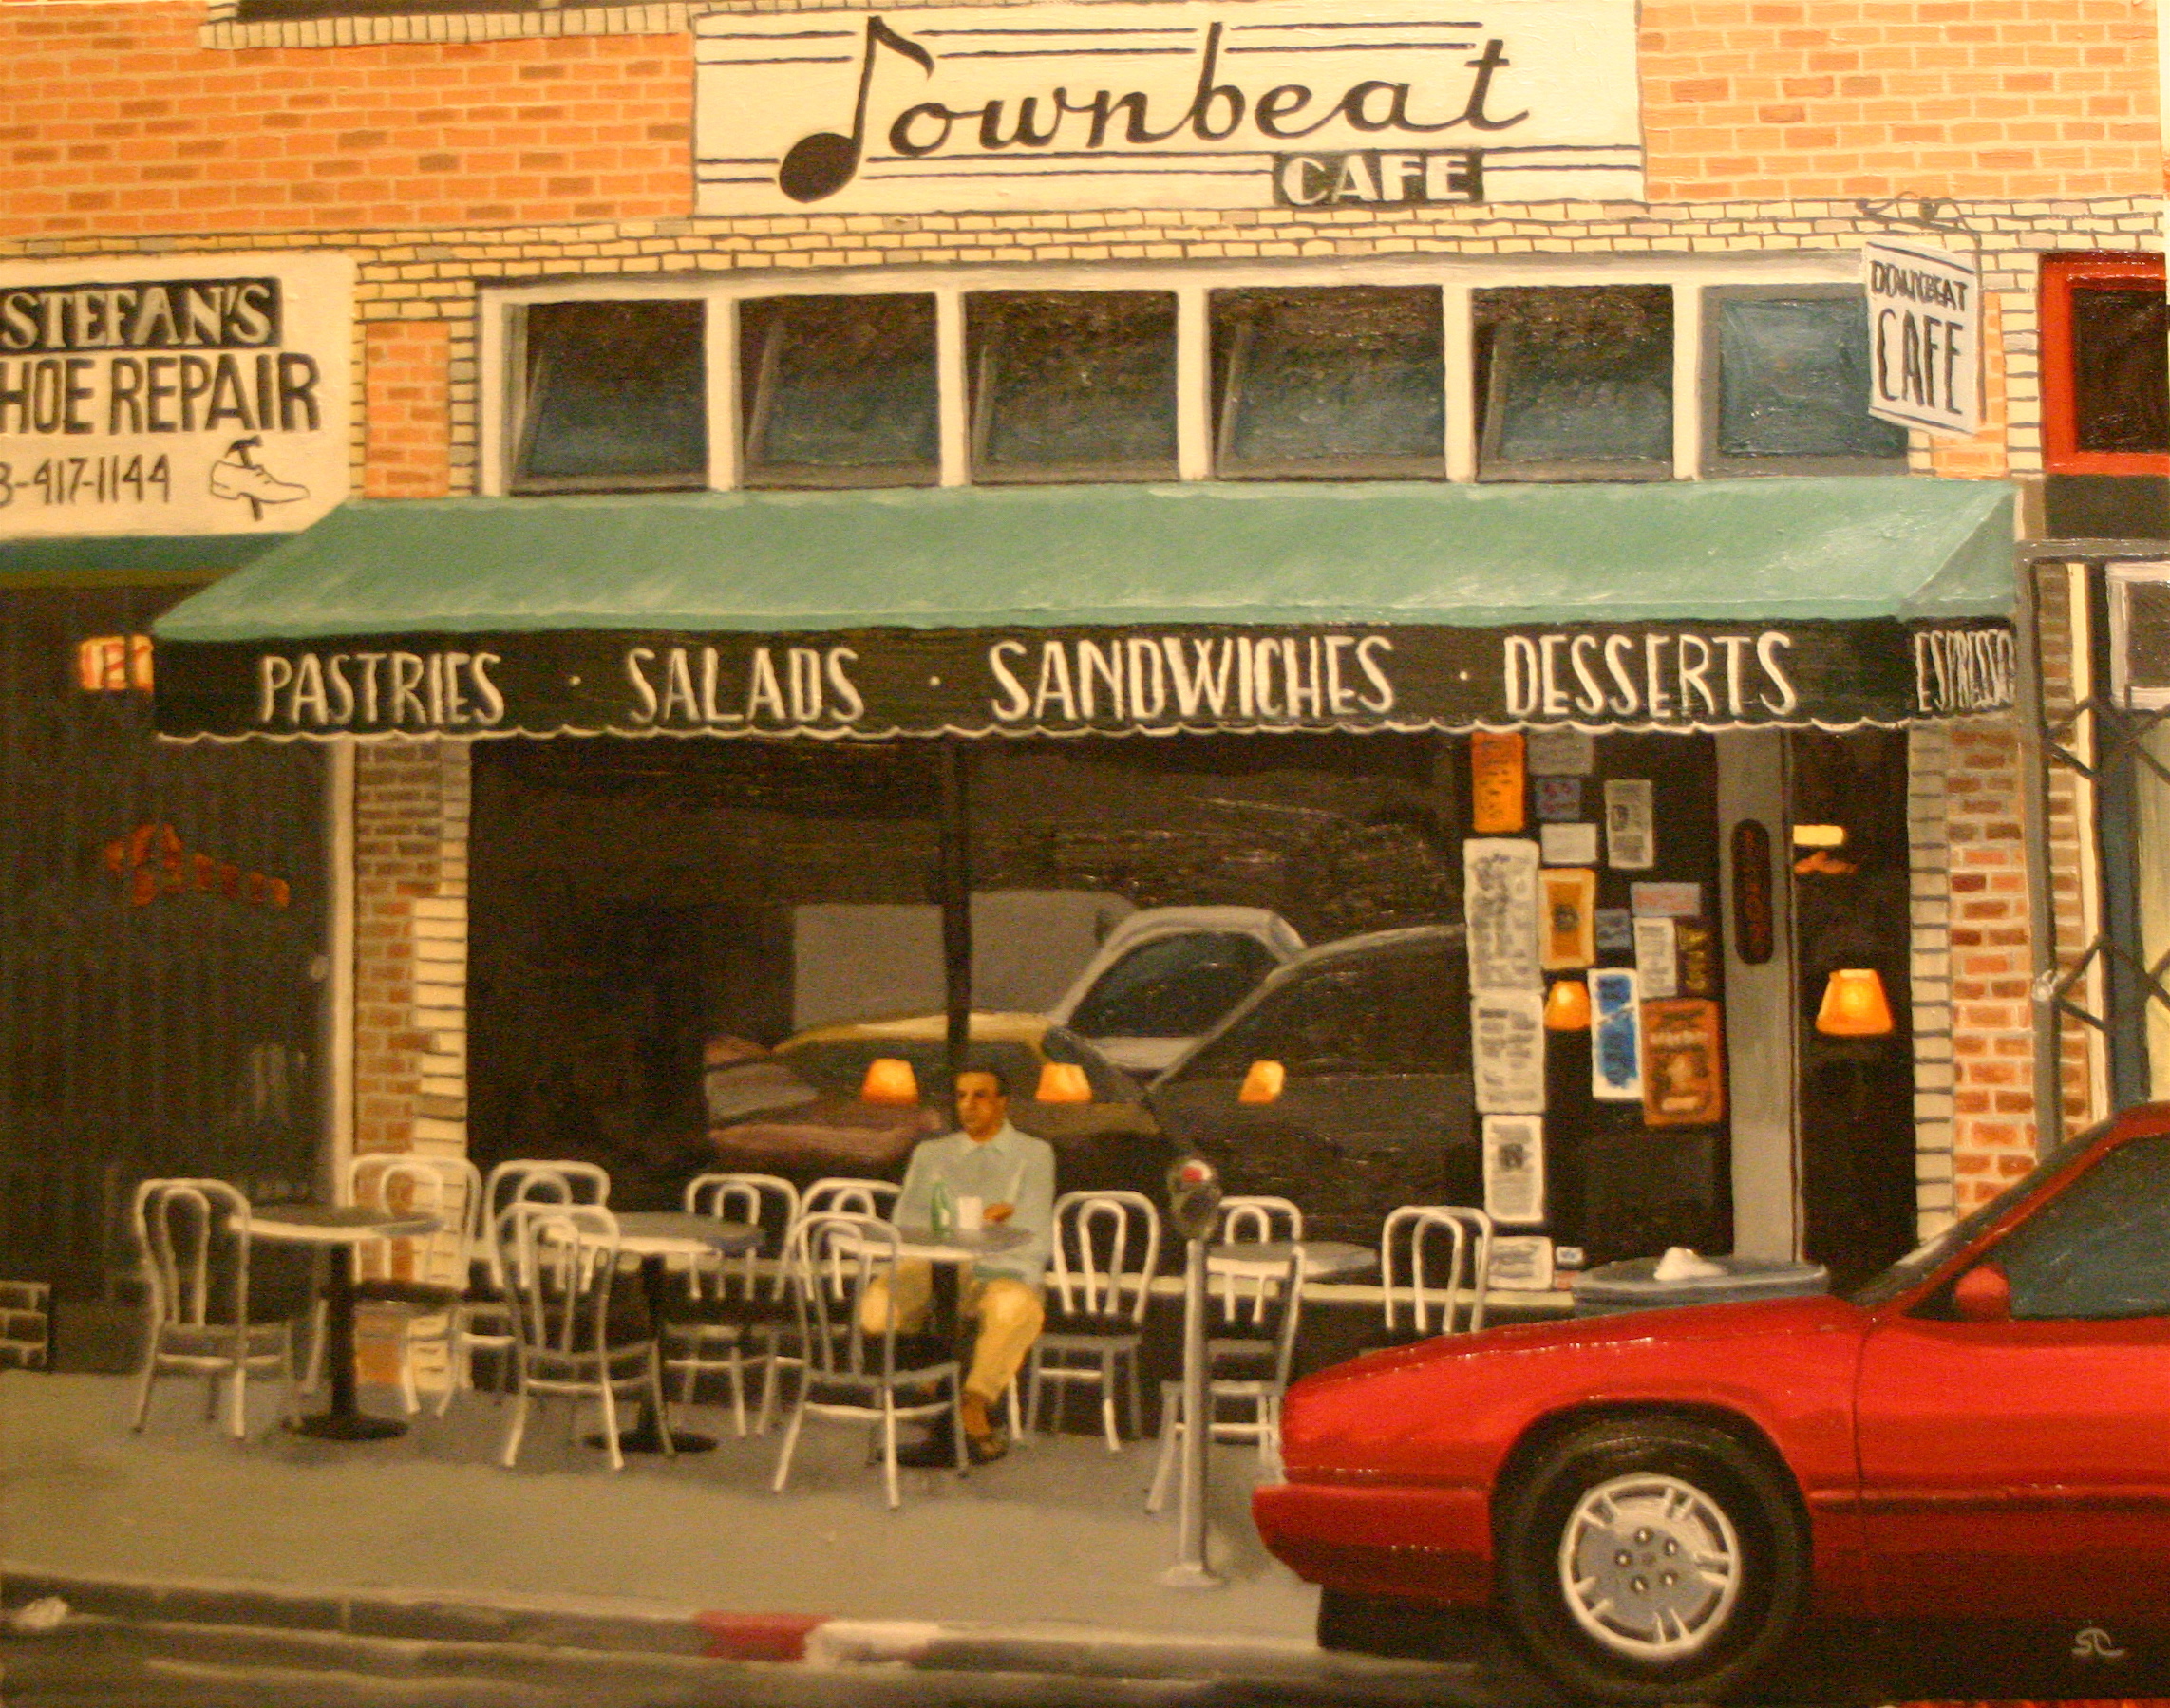 Downbeat Cafe oil on canvas 22 x 28